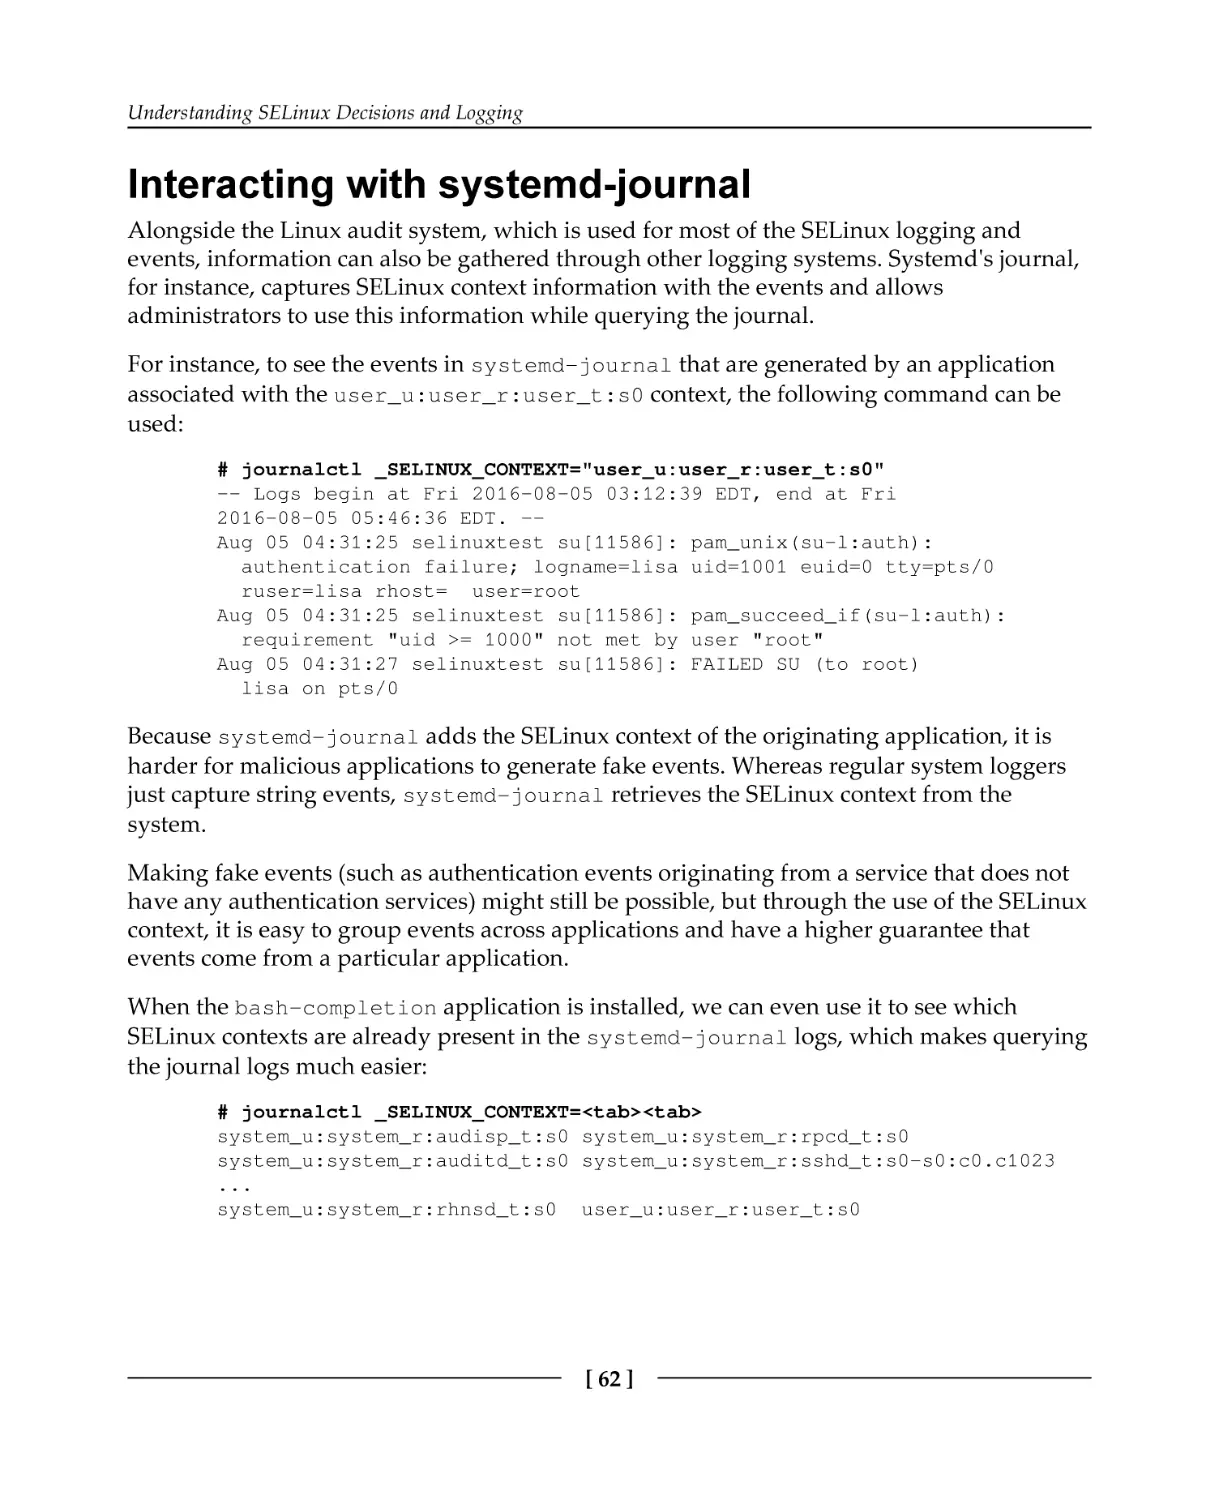 Interacting with systemd-journal